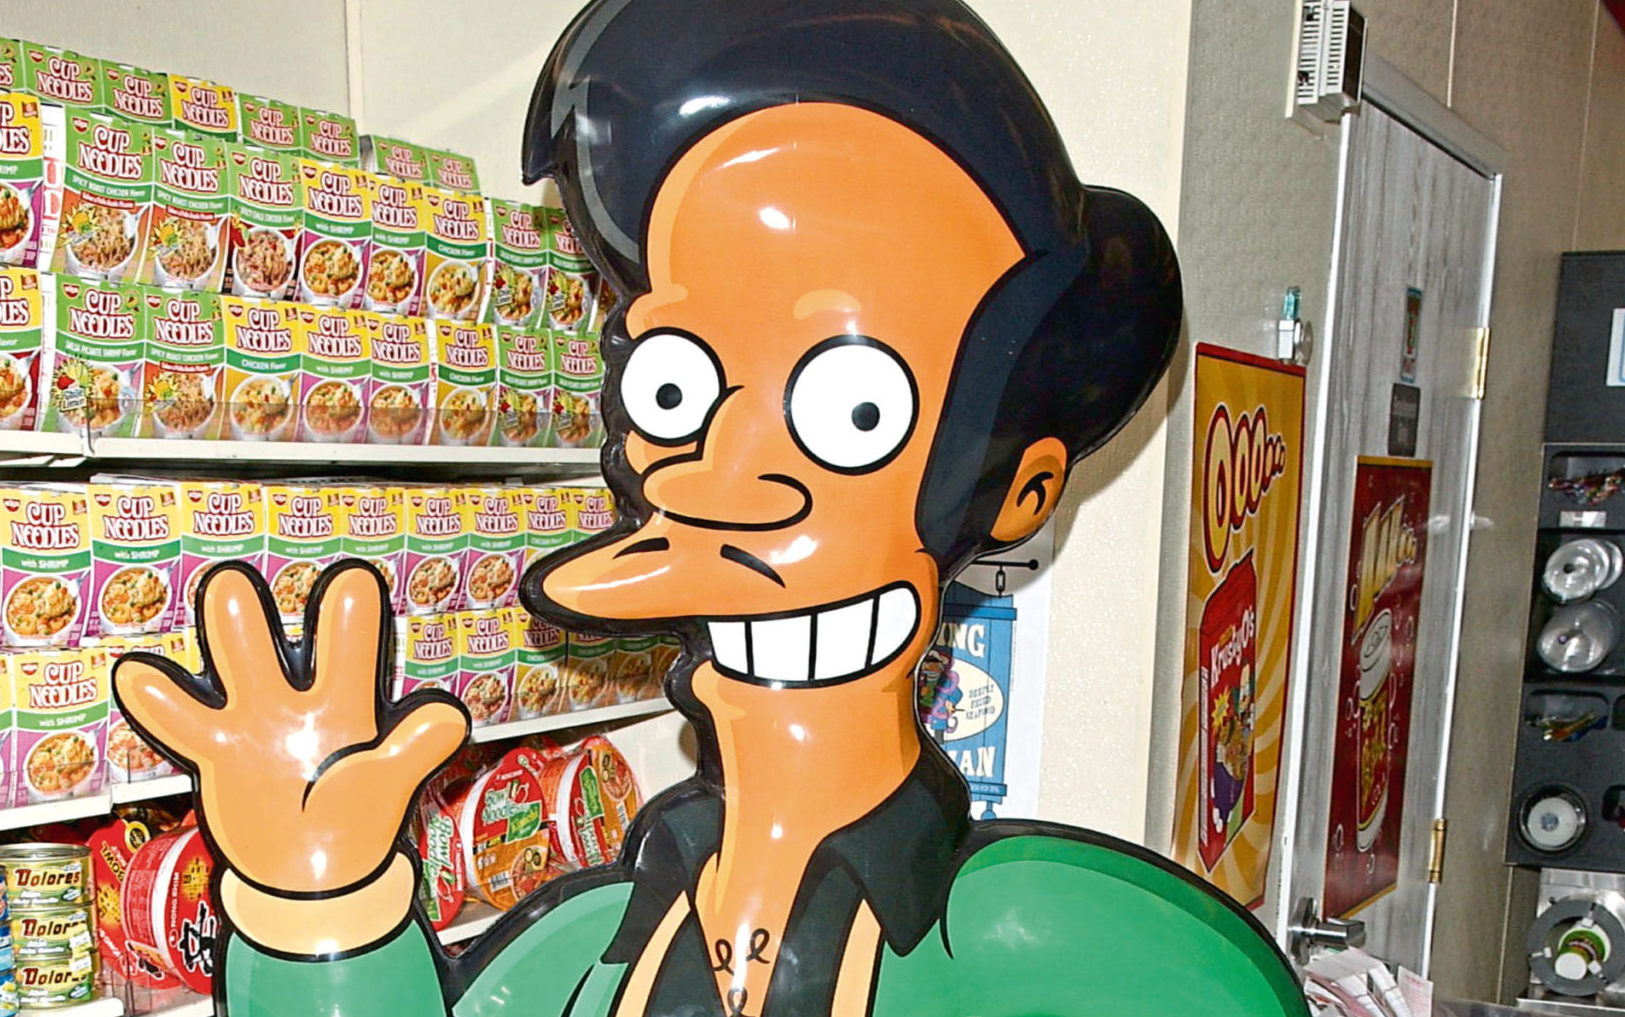 Hank Azaria gave up the role of Apu